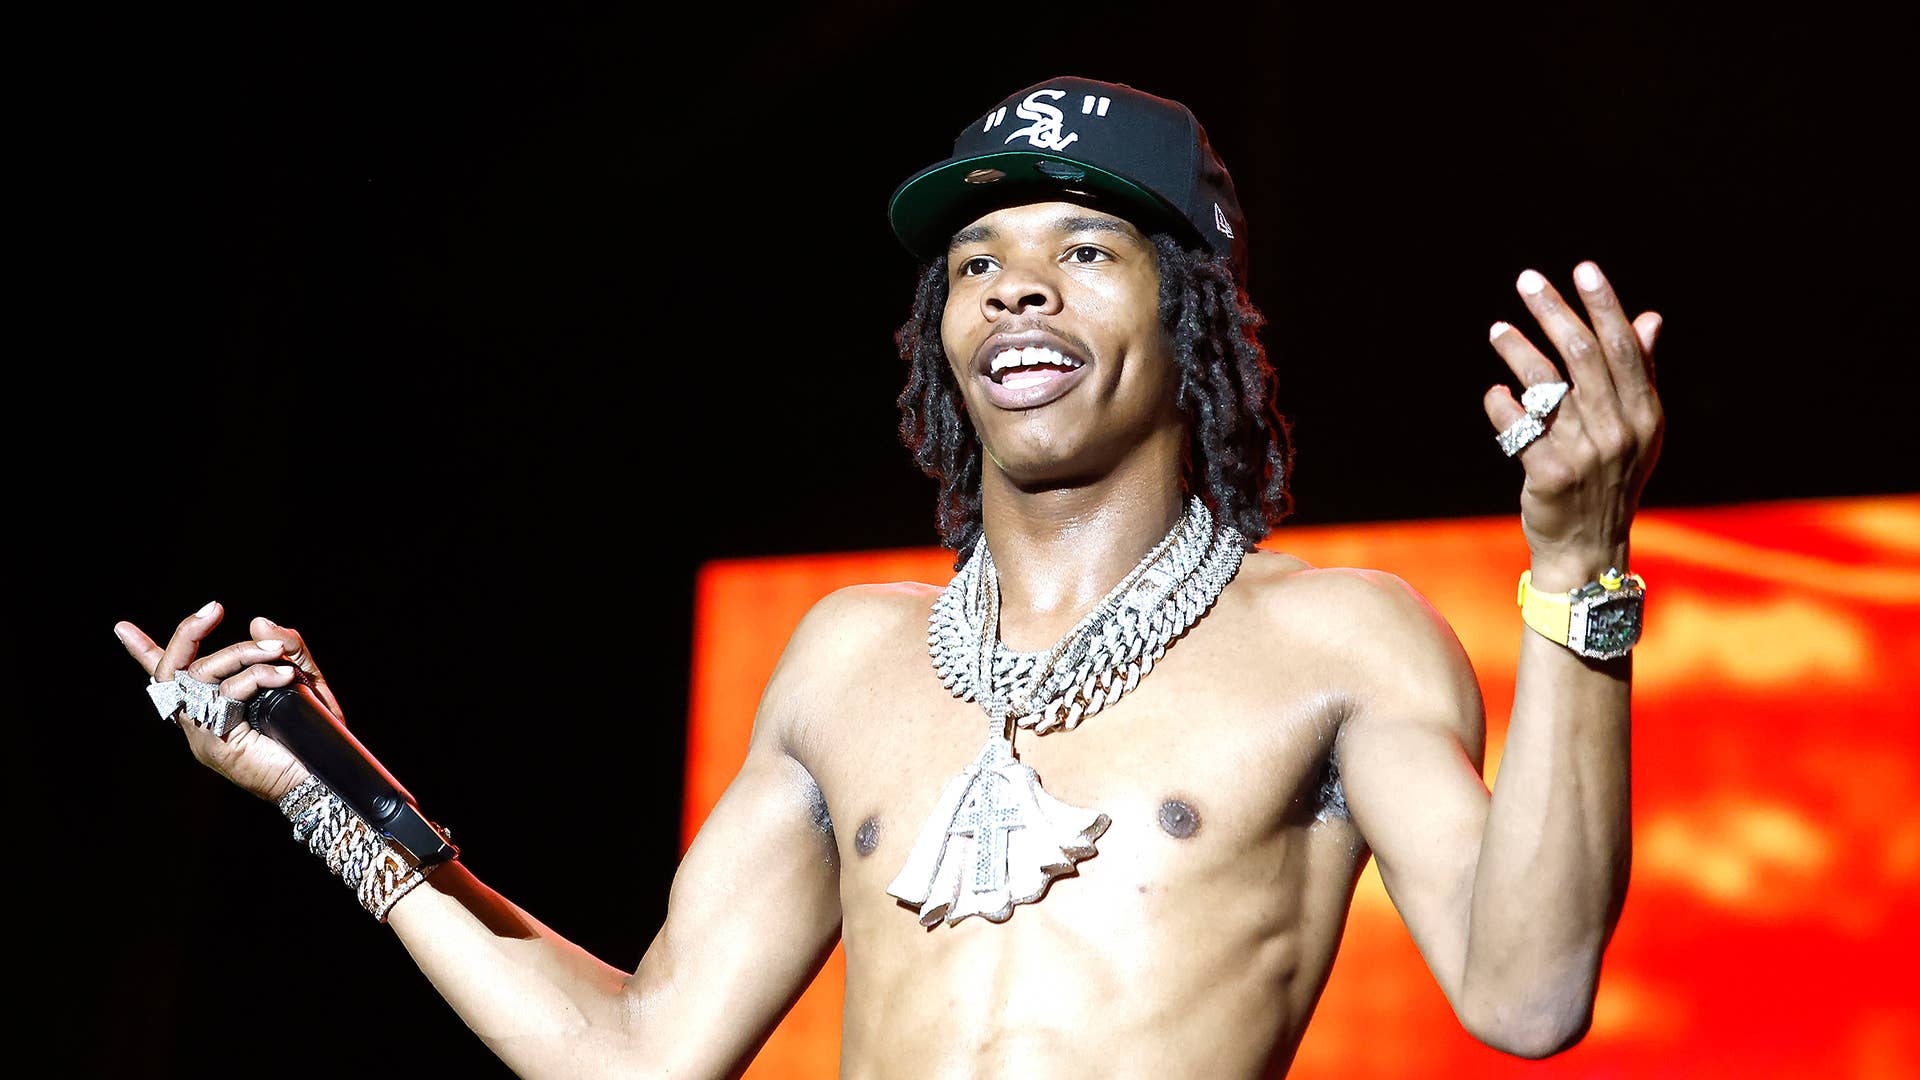 Lil Baby performs at the 2022 Something in the Water Music Festival